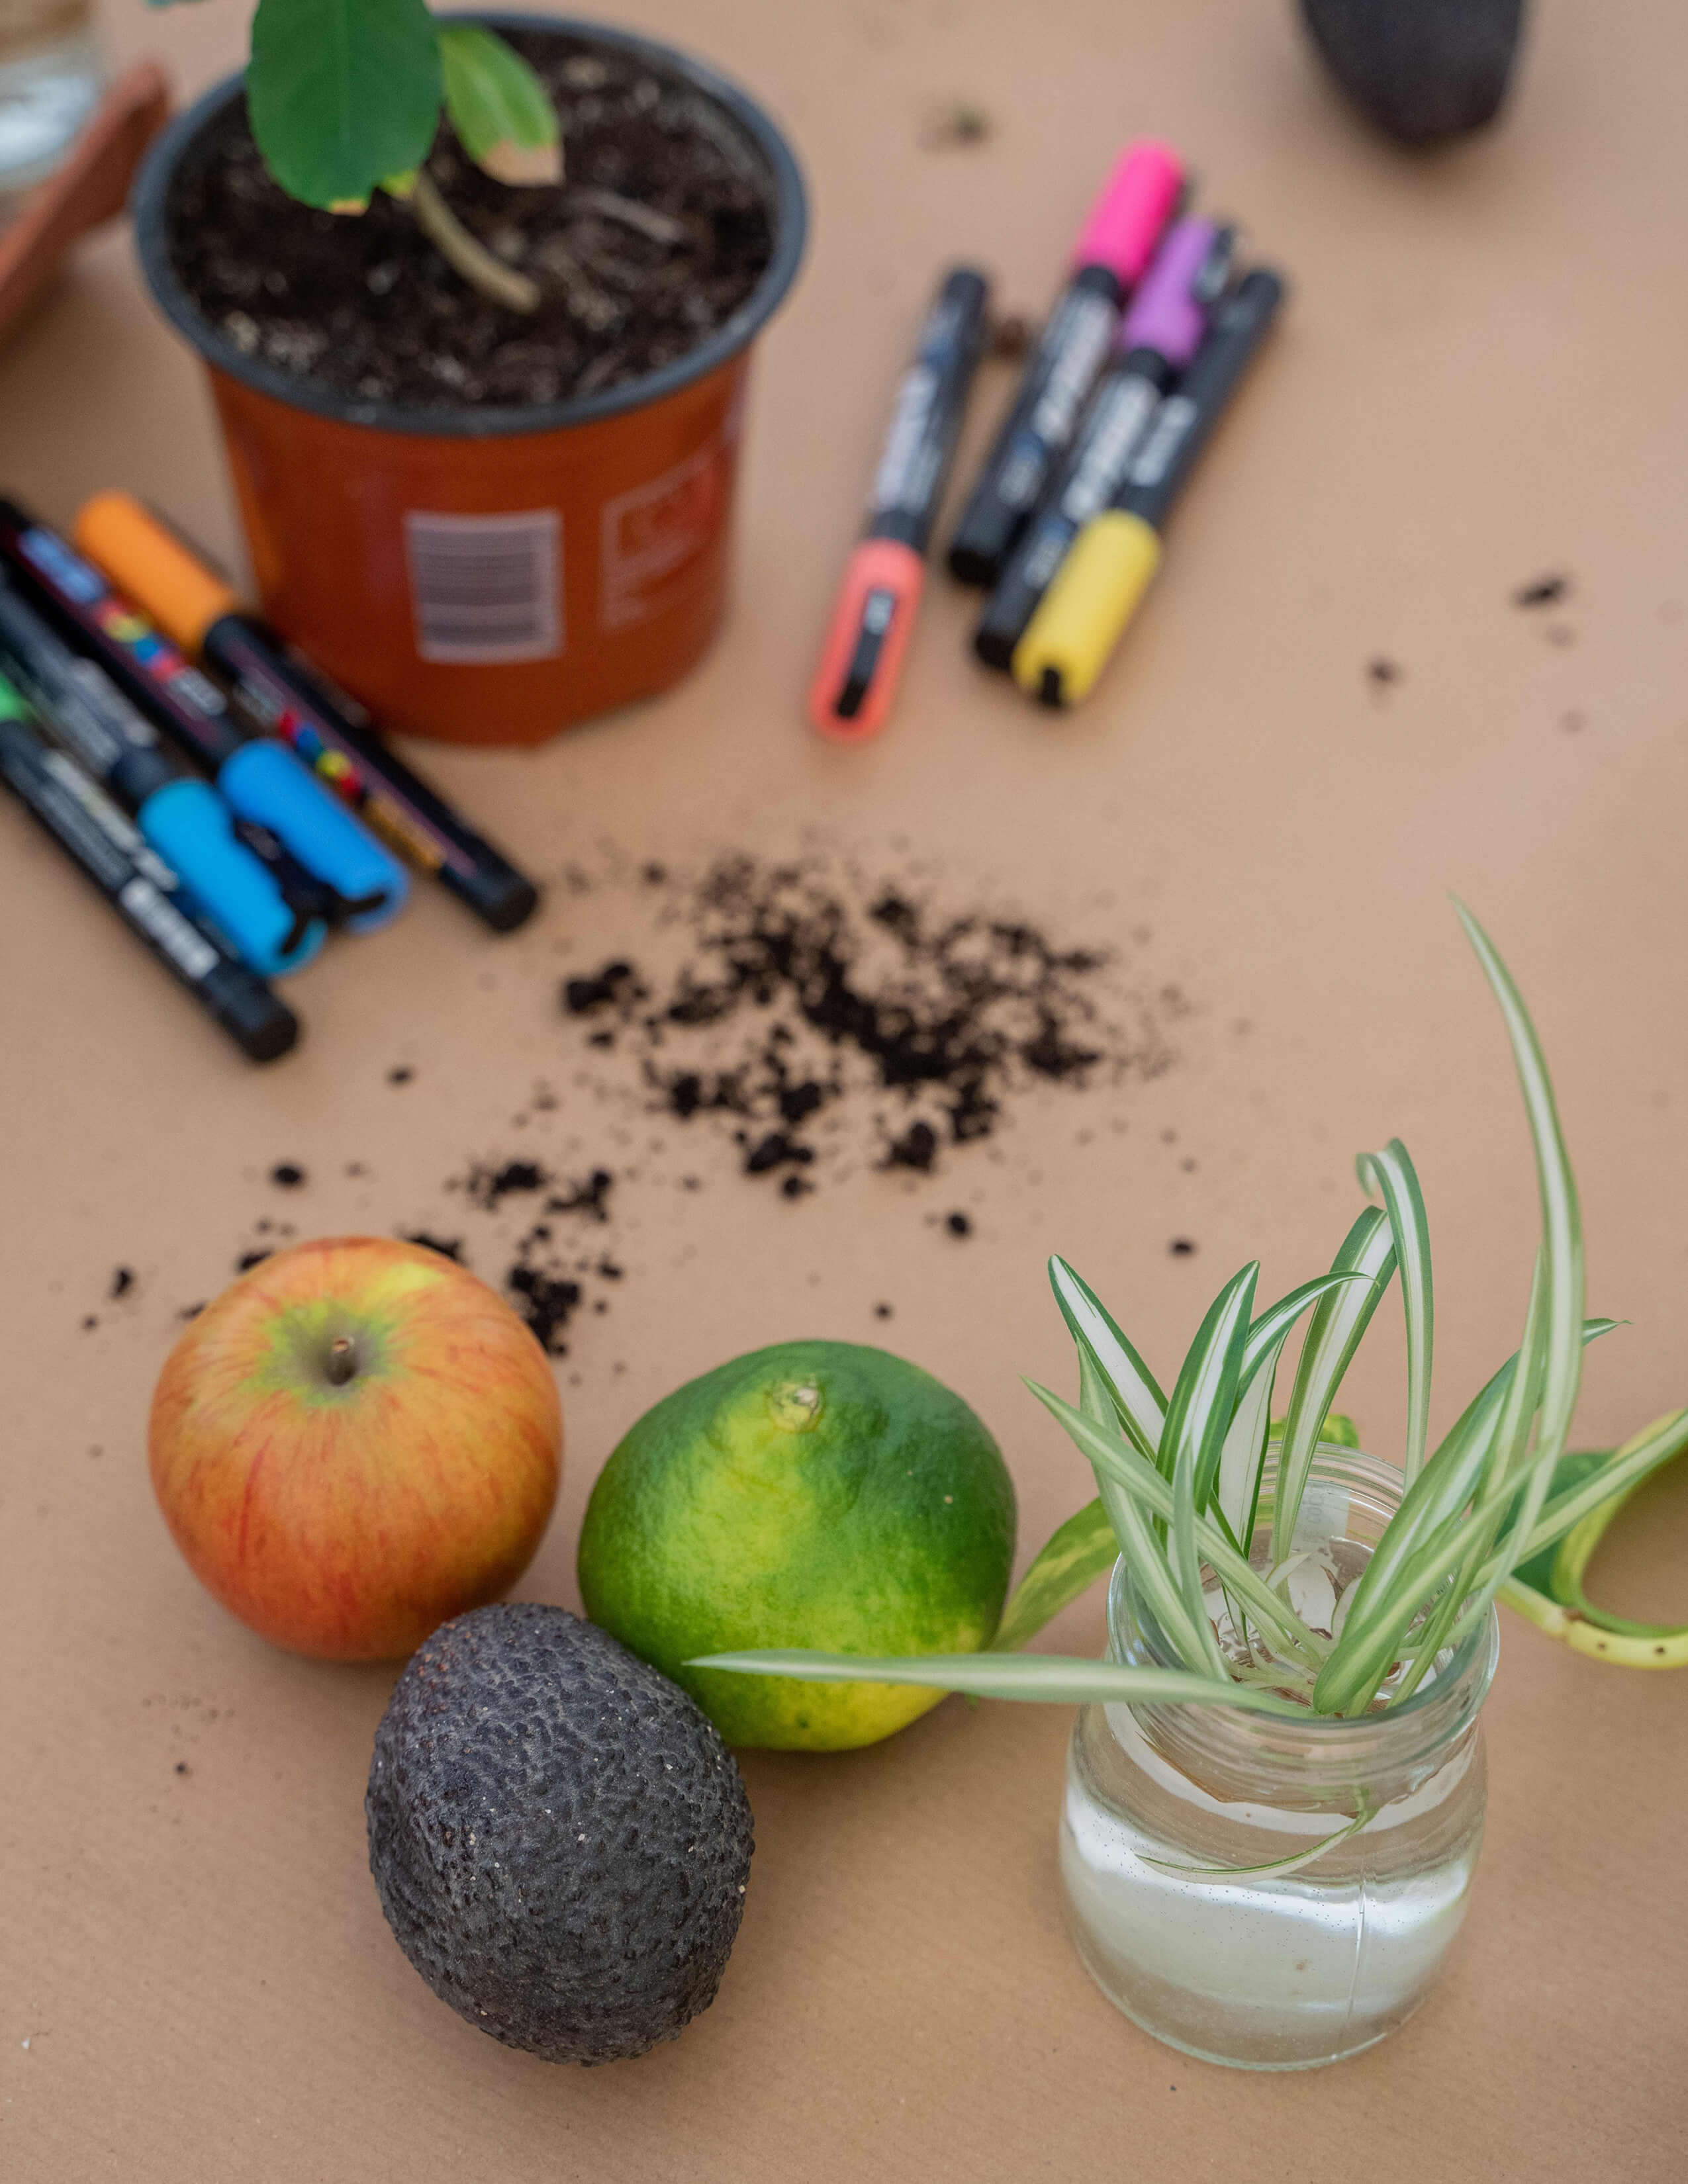 An apple, lime, avocado and Chlorophytum comosum grow in a jar of water on the table while there are crumble of soil, some pens and a pot of plants around.